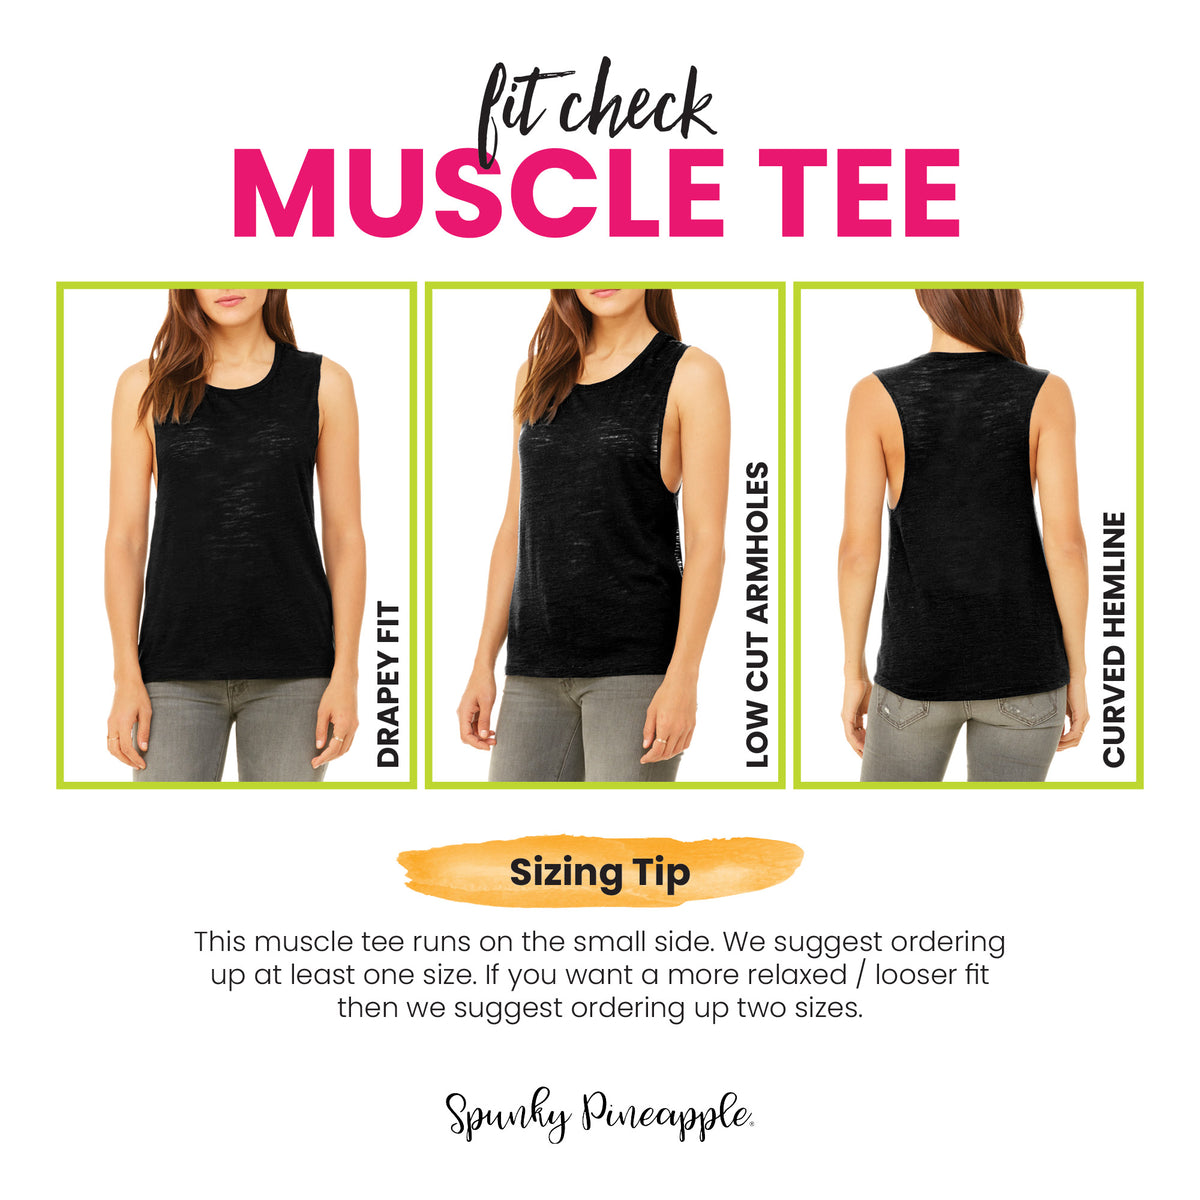 Strong as a Mother Muscle Tee